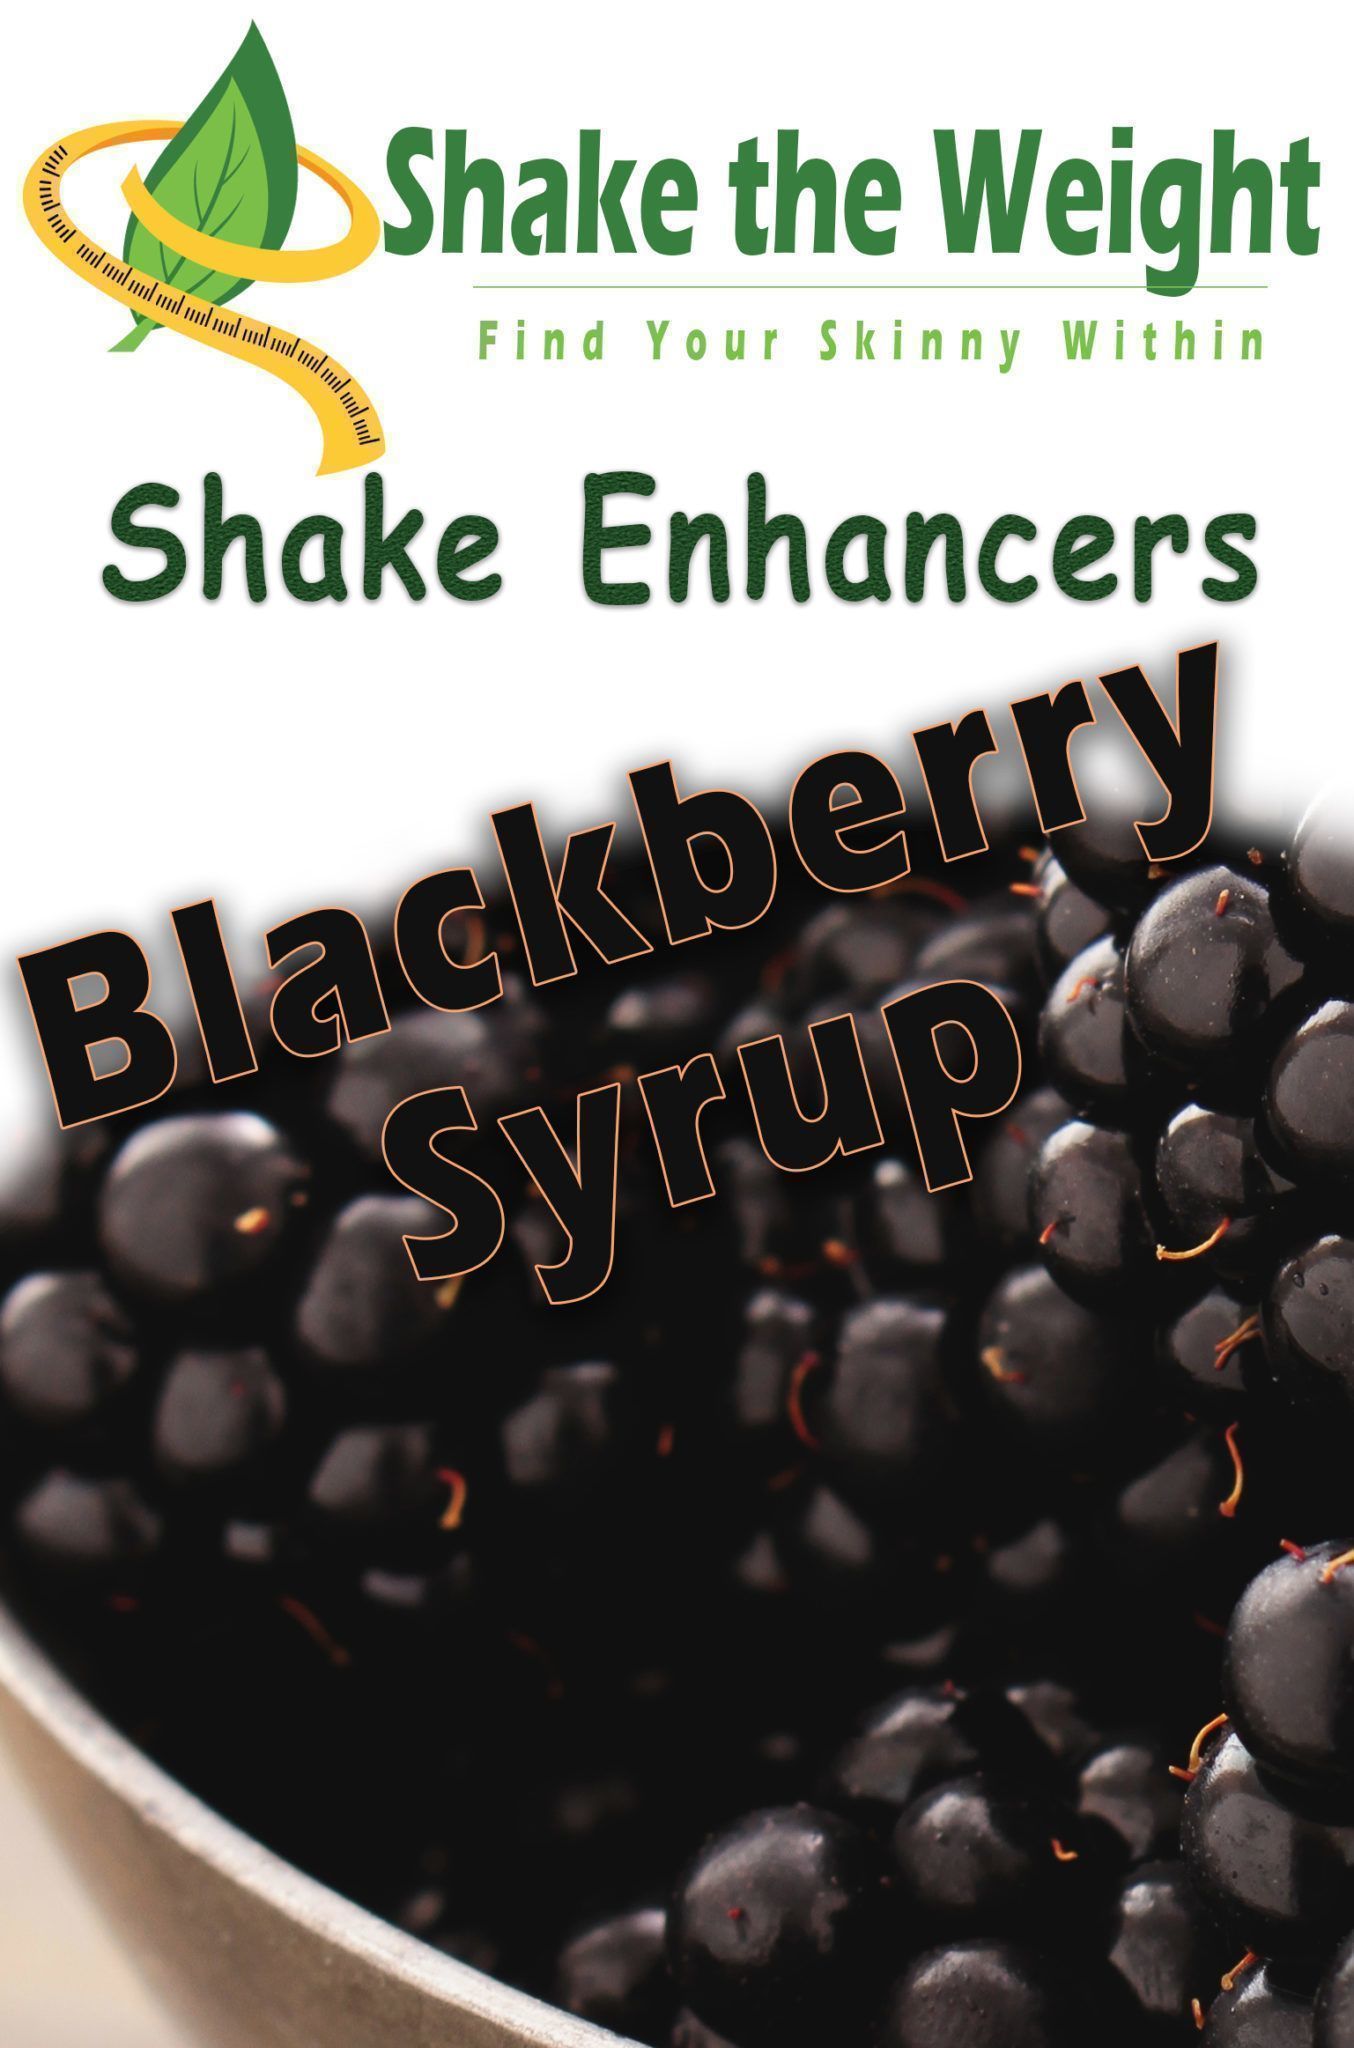 blackberry Syrup, smoothies, weight loss smoothies, smoothie diet, meal replacement smoothie, smoothies for weight loss, smoothie meal replacement, protein smoothies, sugar free Syrup